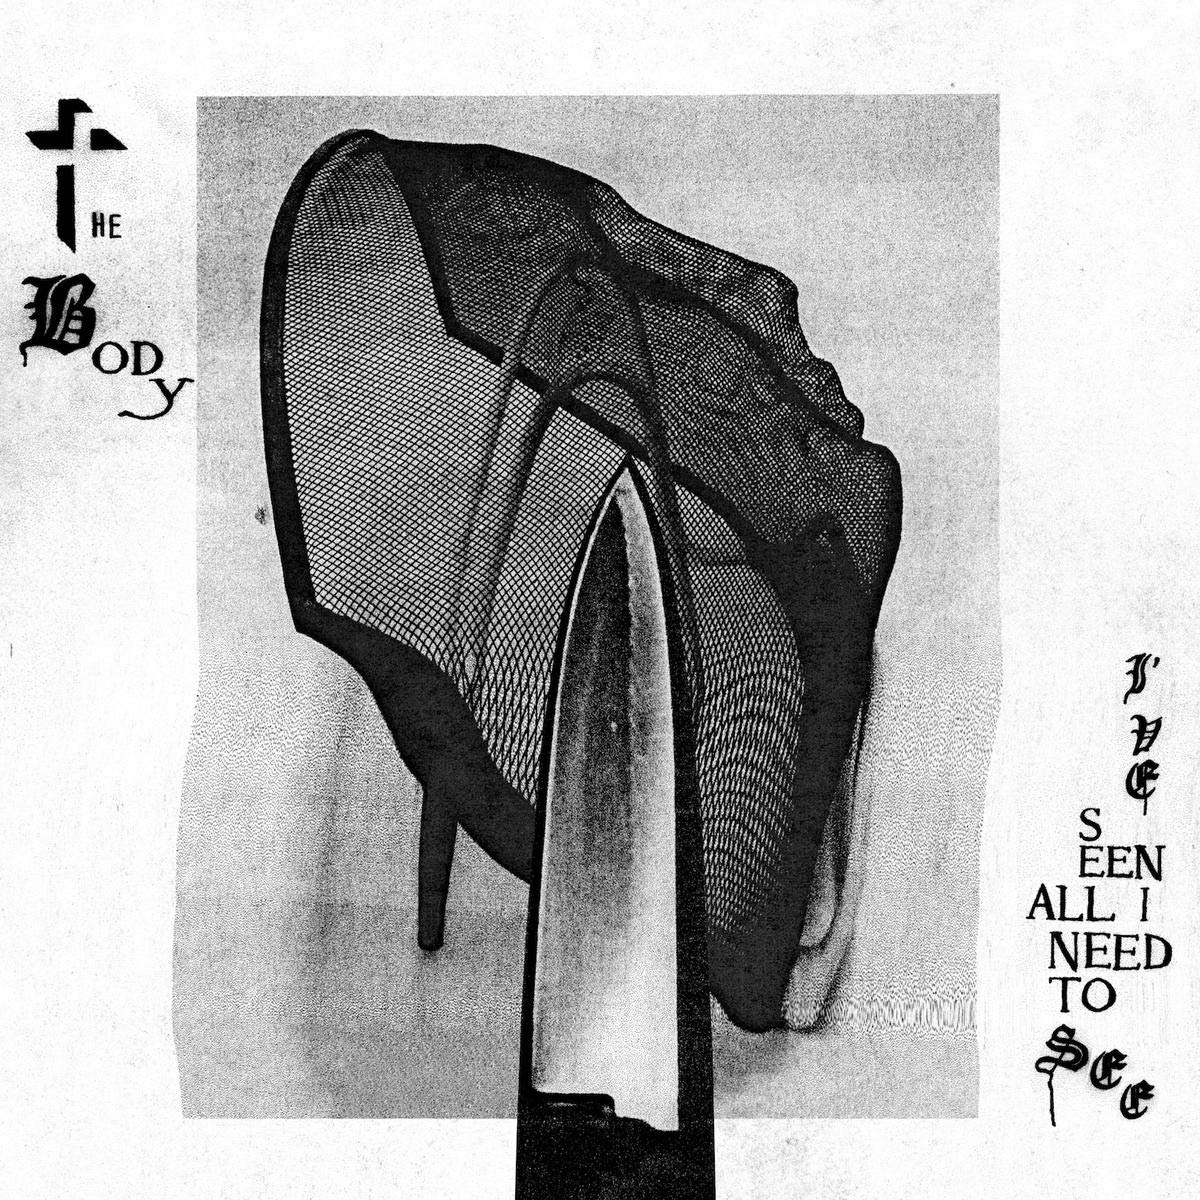 The Body - I've Seen All I Need To See